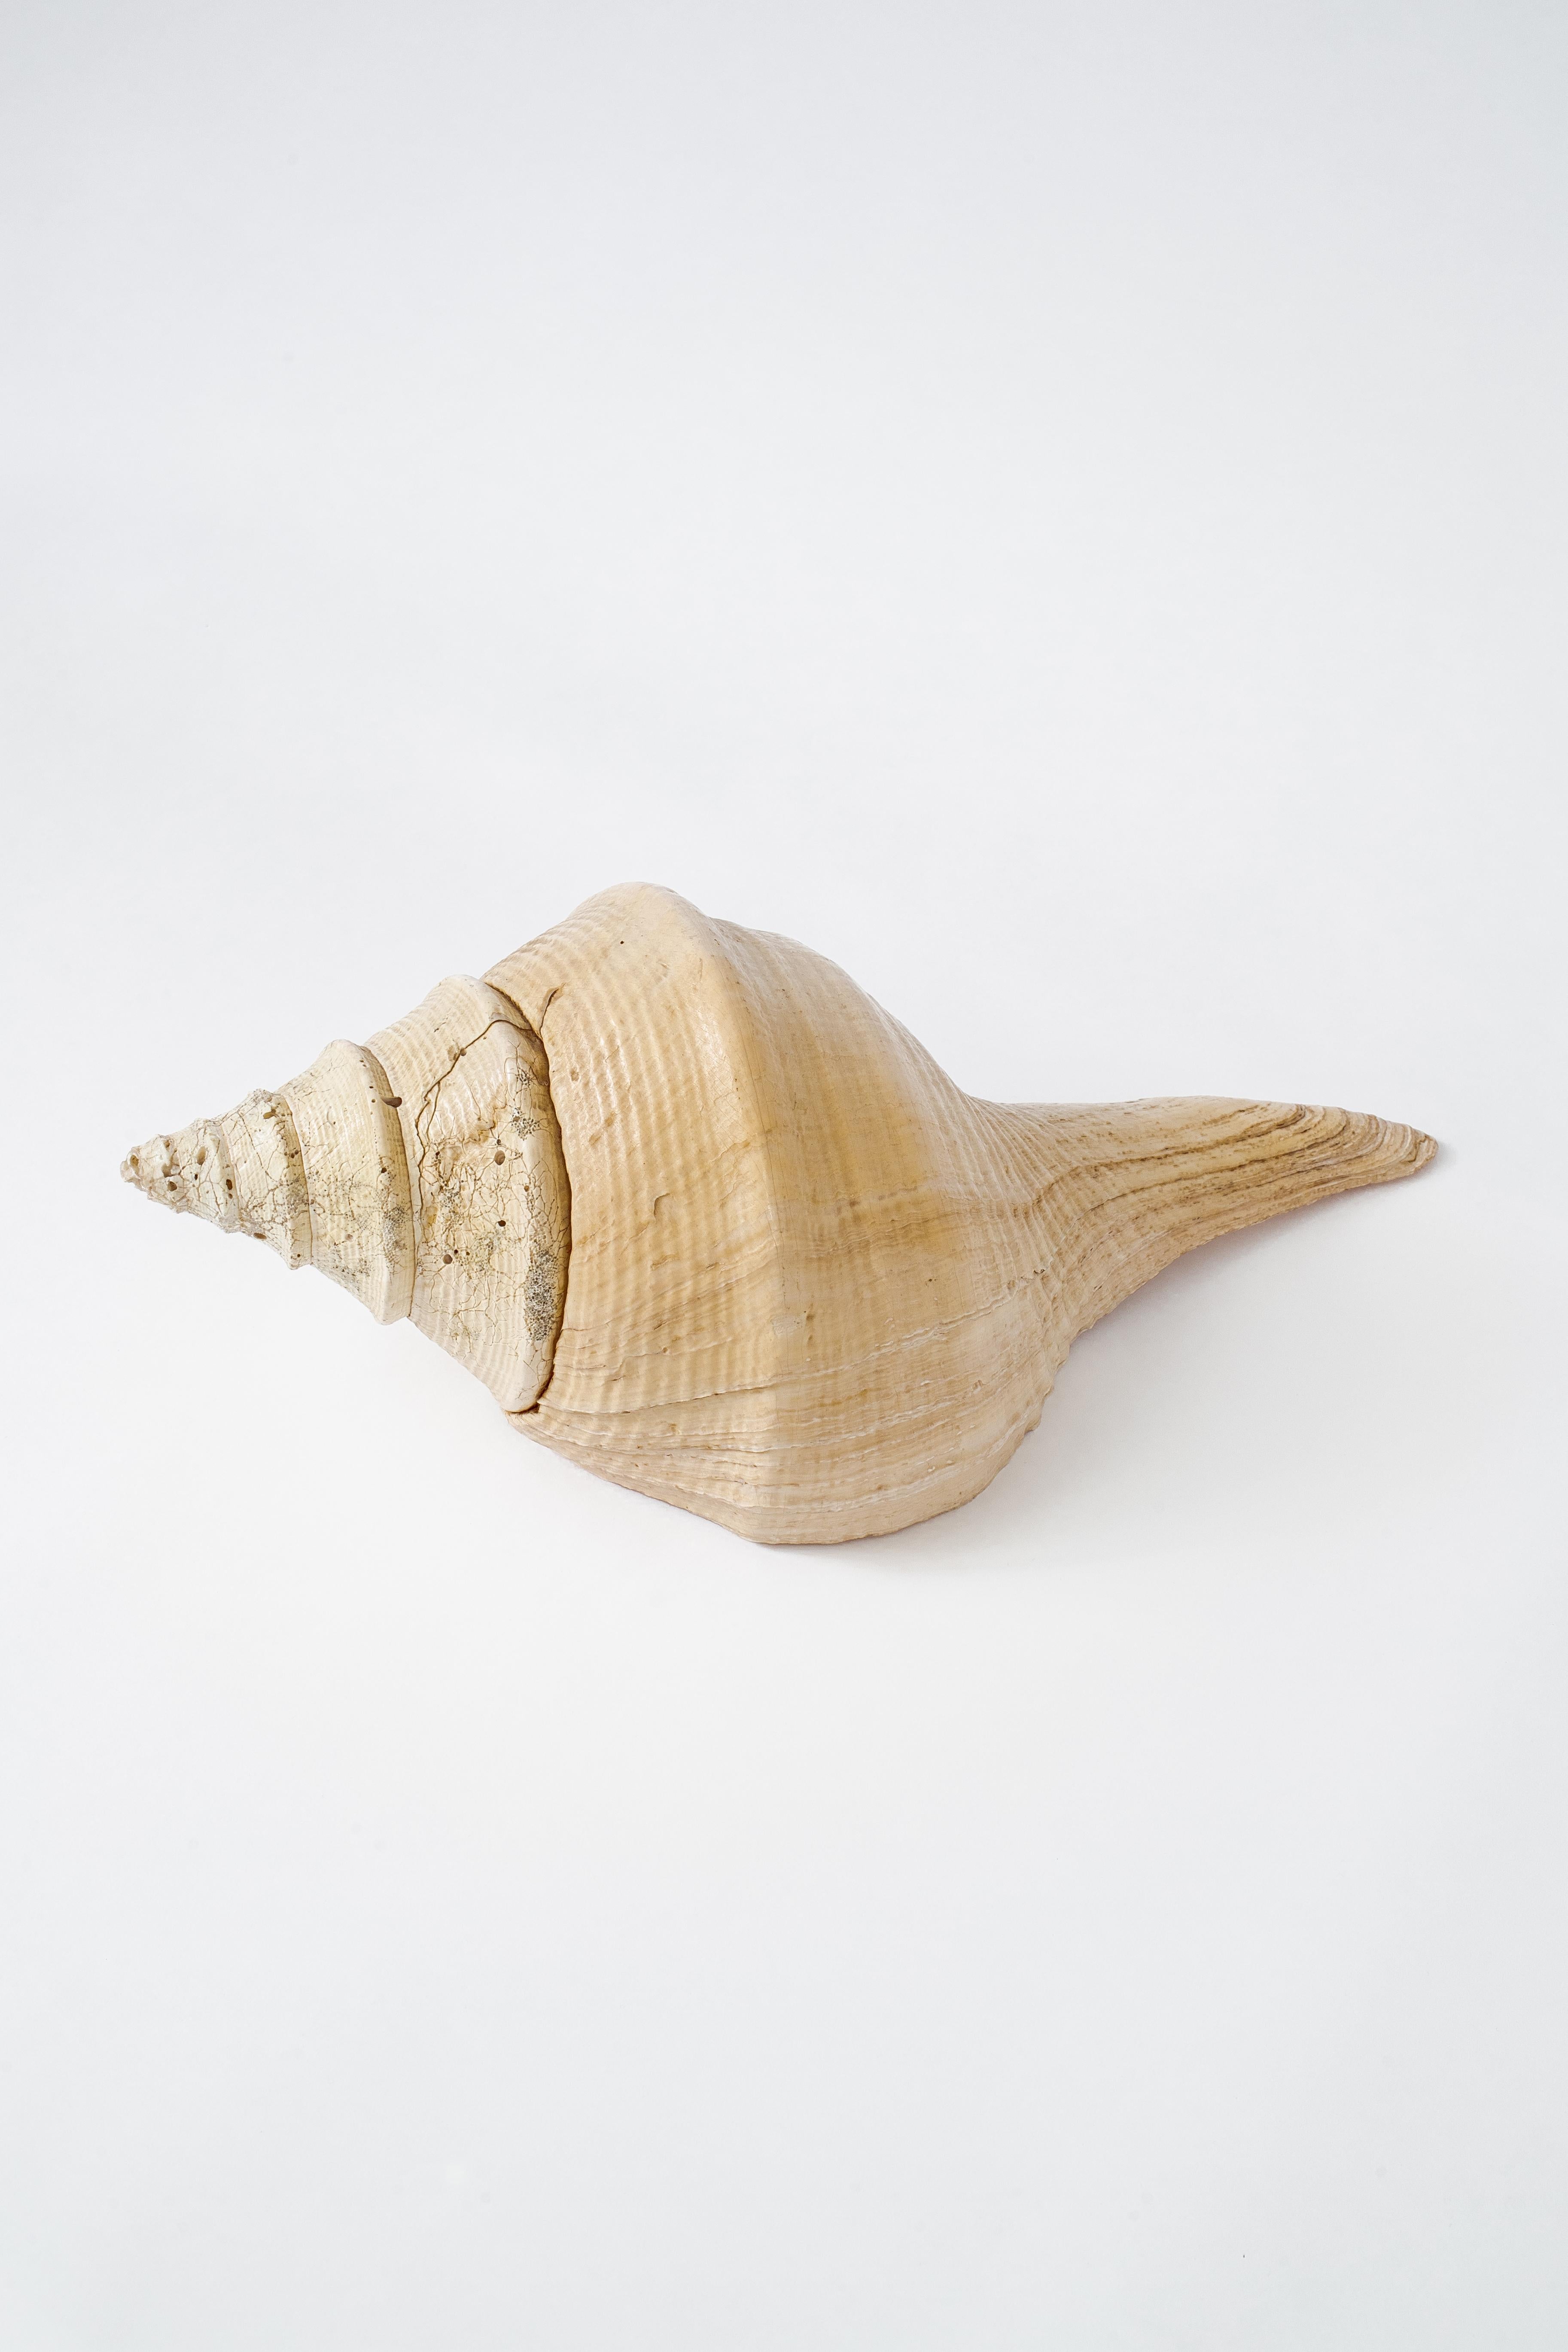 Asian Very Large Natural Conch Shell, Pacific Ocean, 1970’s